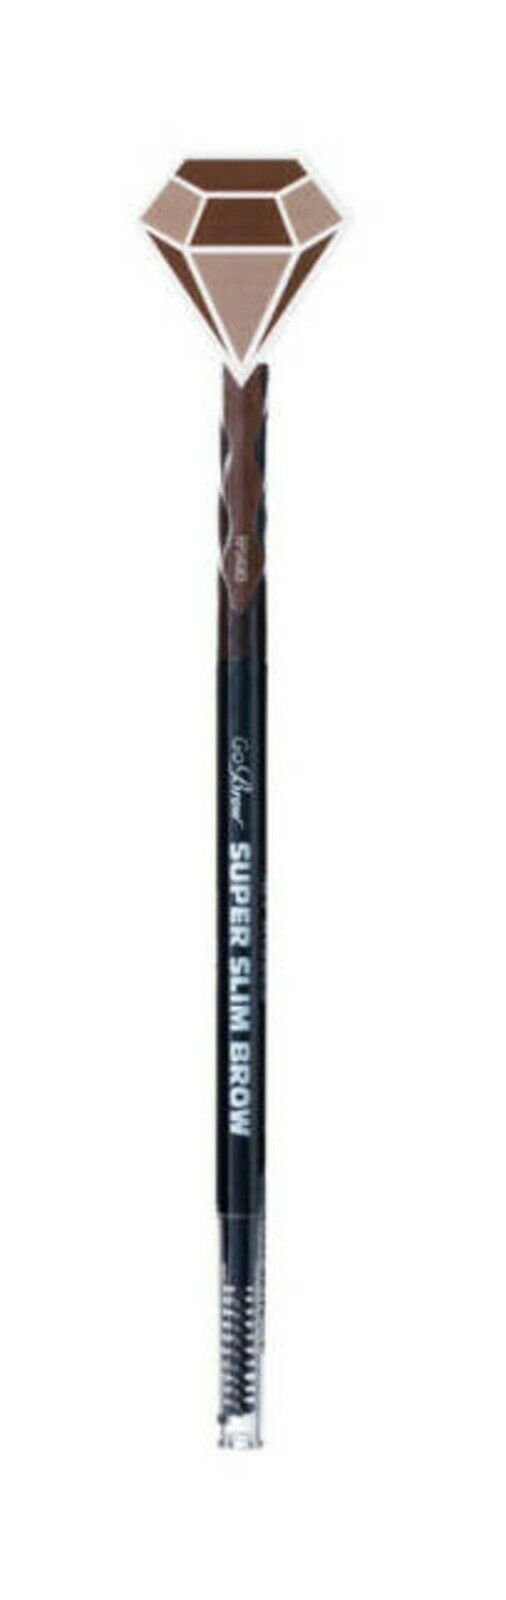 Primary image for RUBY KISSES GO BROW SUPER SLIM BROW PENCIL MEDIUM BROWN #RP04